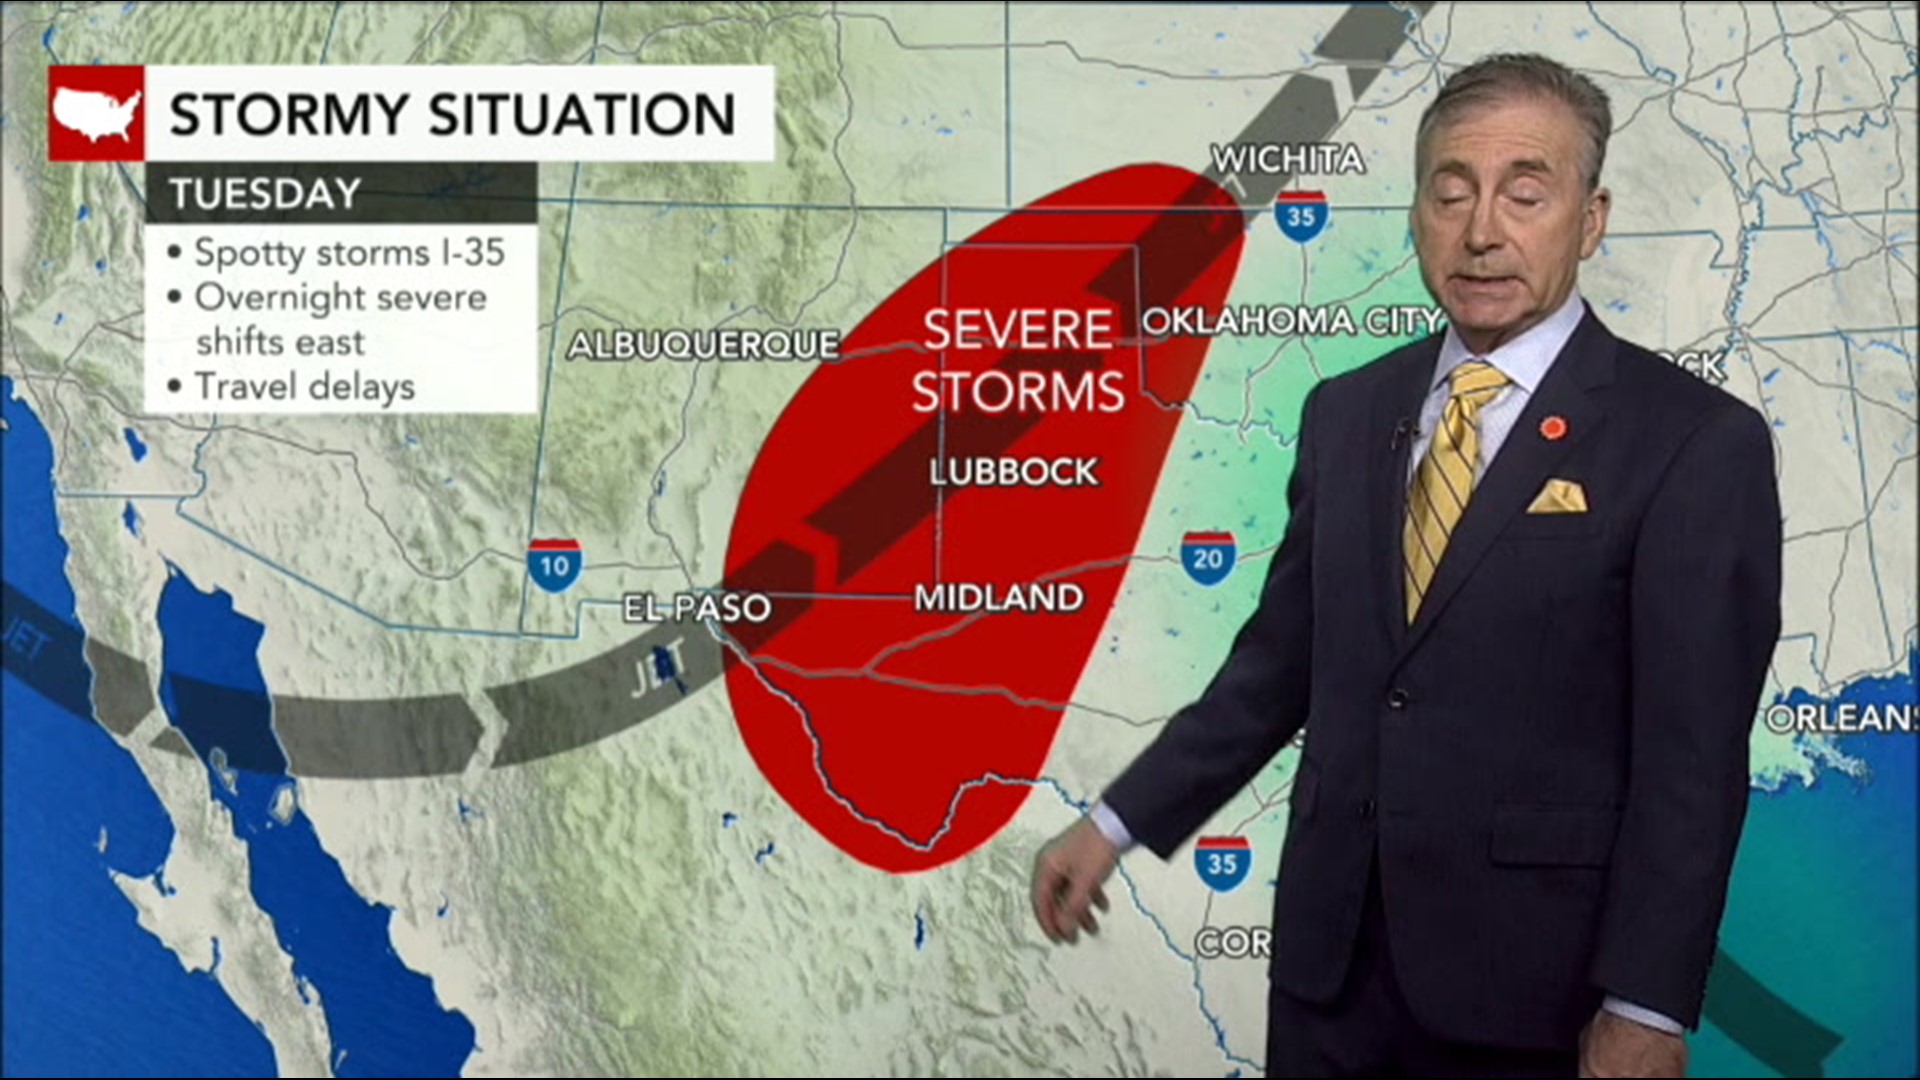 fret Medical break down Risk of severe thunderstorms to return to South Central states | kgw.com